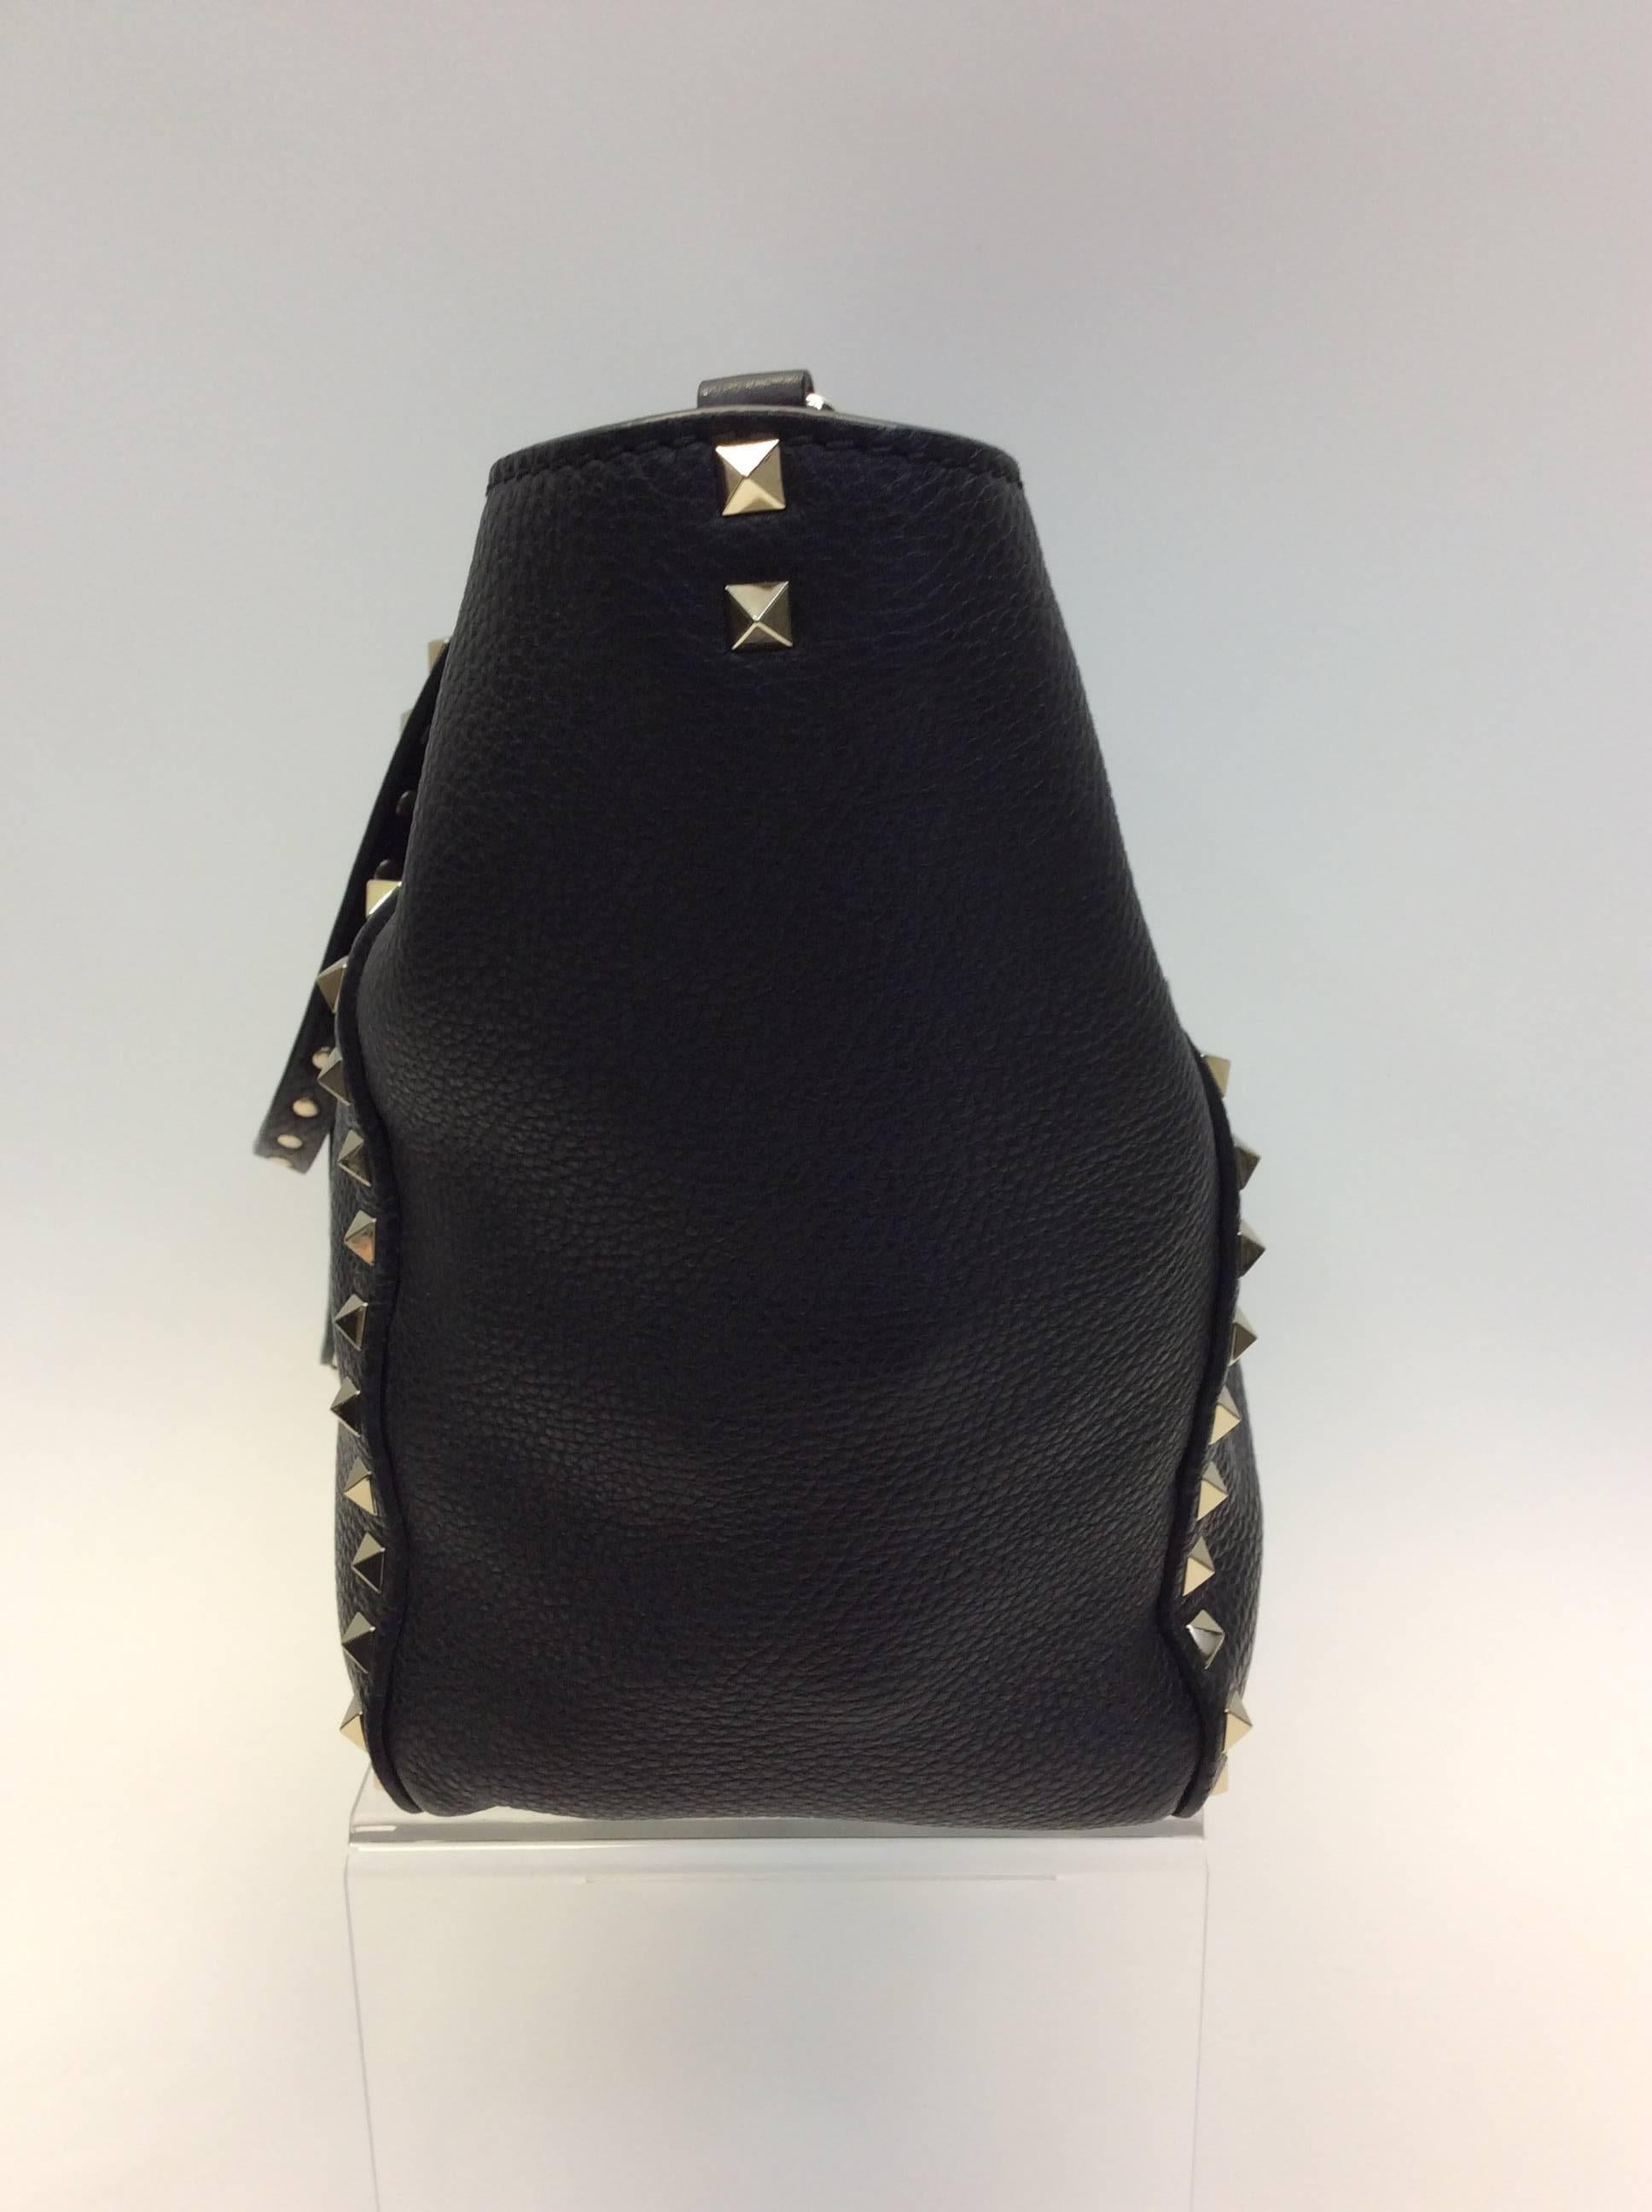 Valentino Black Studded Shoulder Bag
Silver Hardware
$2250
Made in Italy
Leather
14